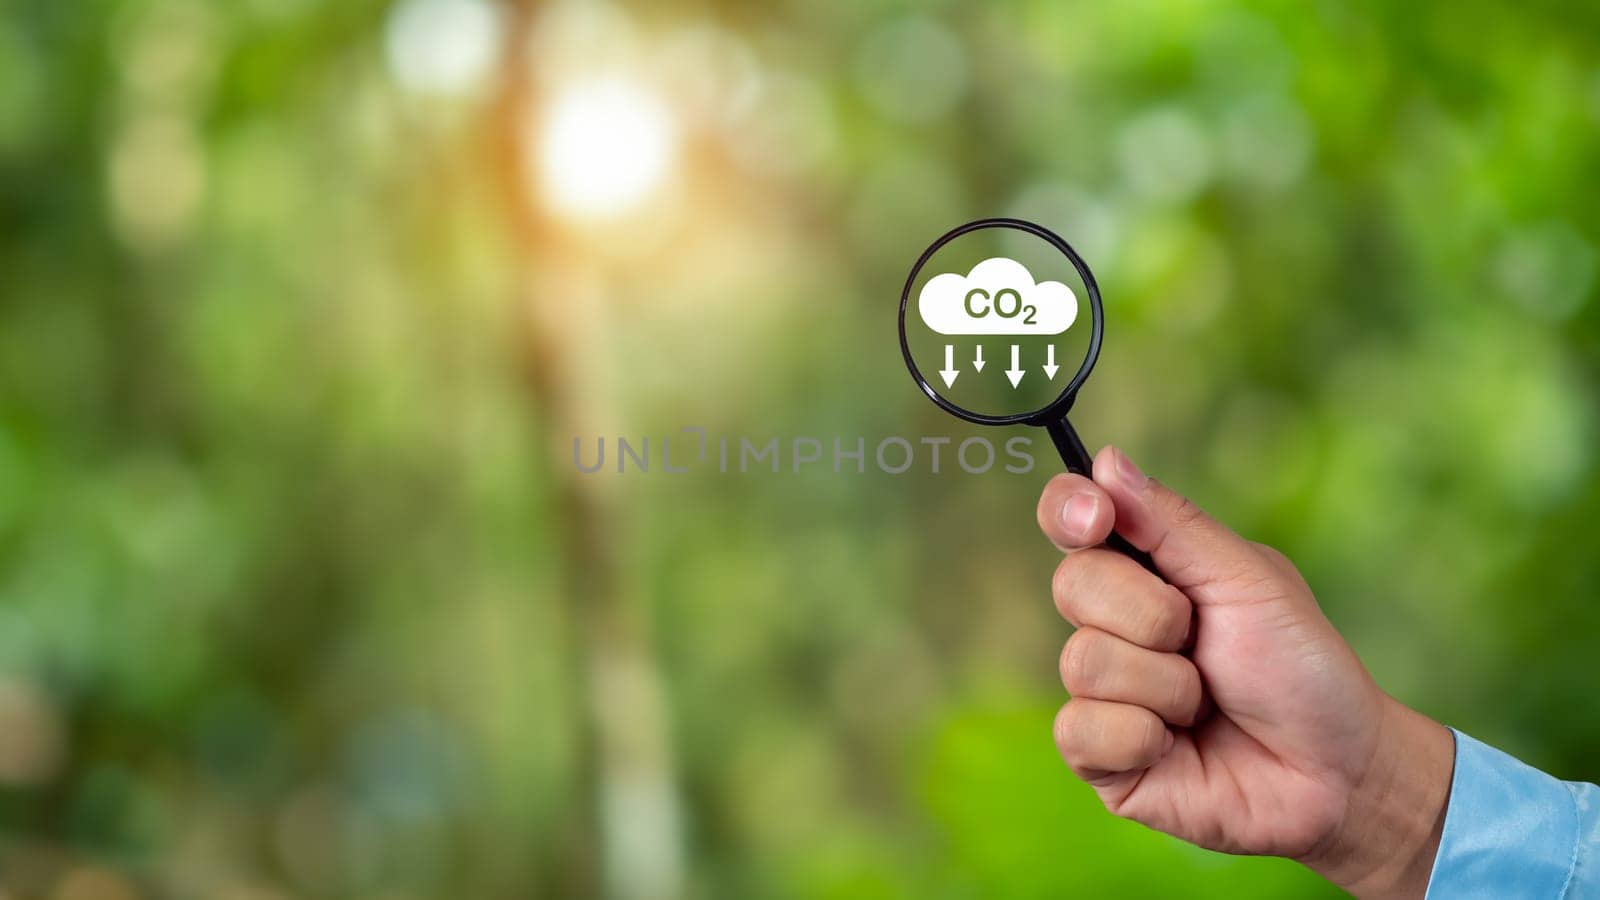 A clean and friendly environment without carbon dioxide emissions, Hand holding magnifying glass with CO2 reduction icon inside, carbon credit to limit global warming from climate change, carbon neutral. by Unimages2527